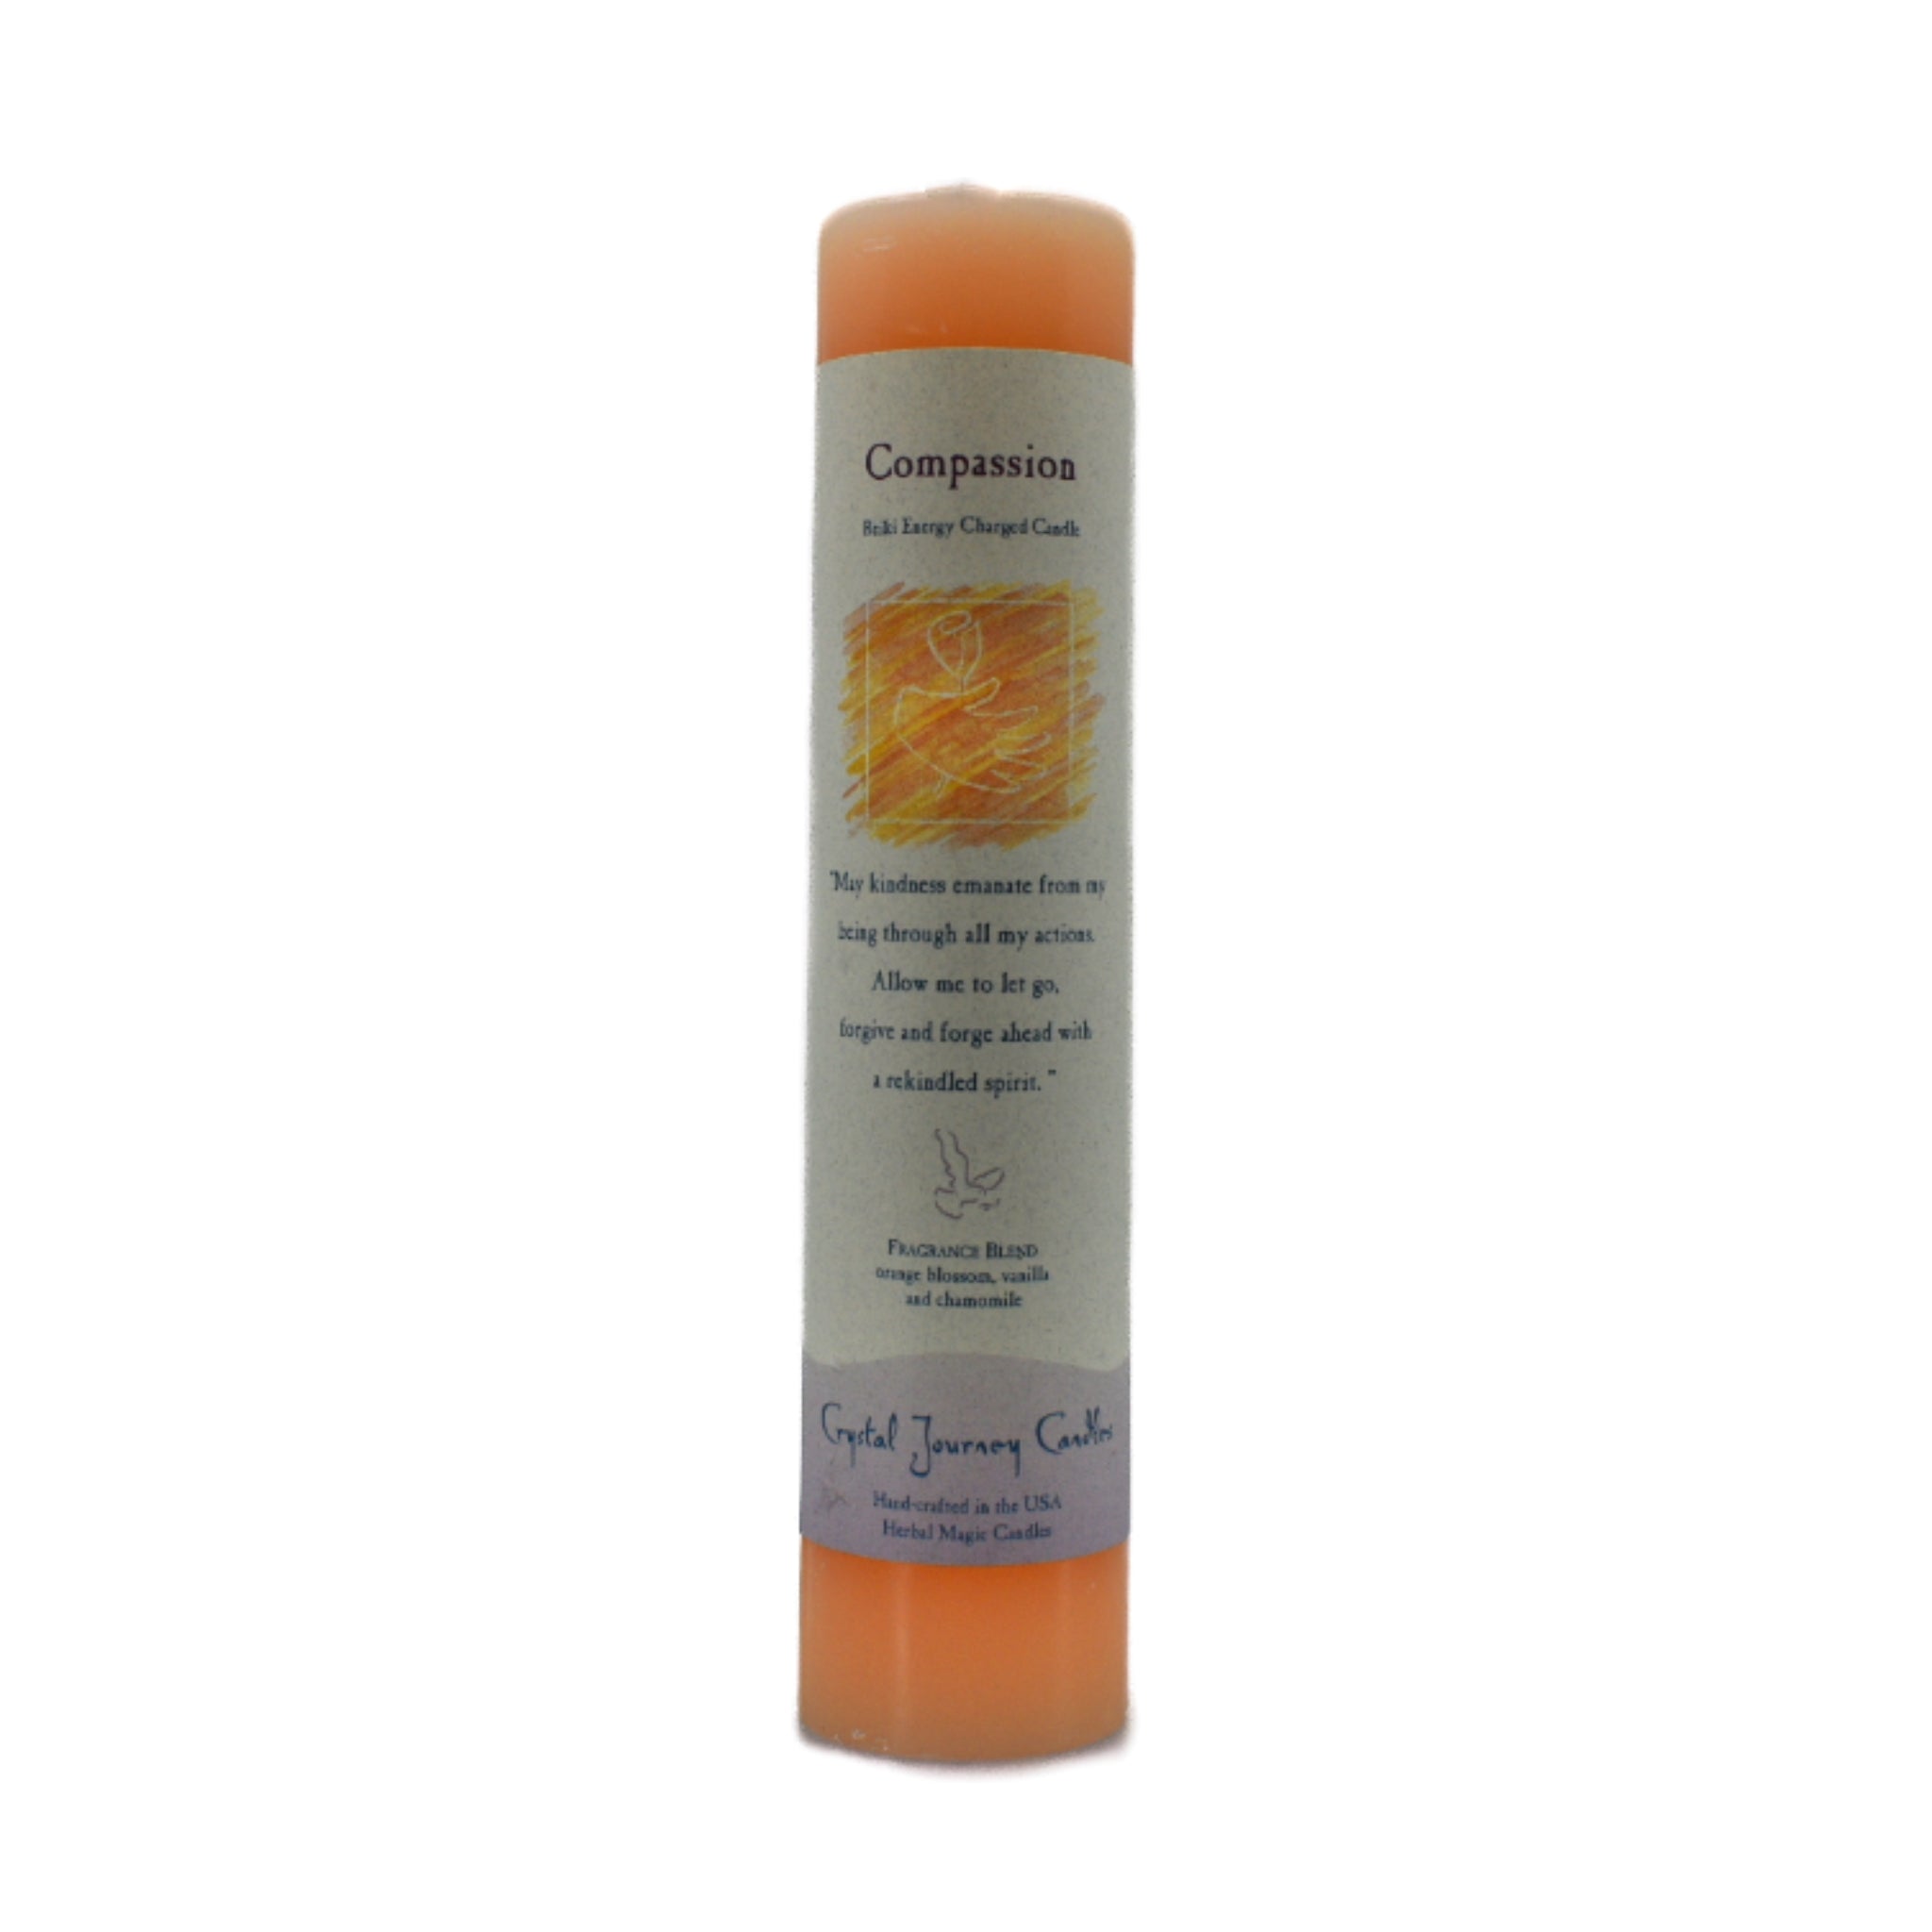 Compassion Pillar Candle.  Use to enhance your level of understanding and sympathy towards others.  Orange candle scented with chamomile, orange blossoms and vanilla.